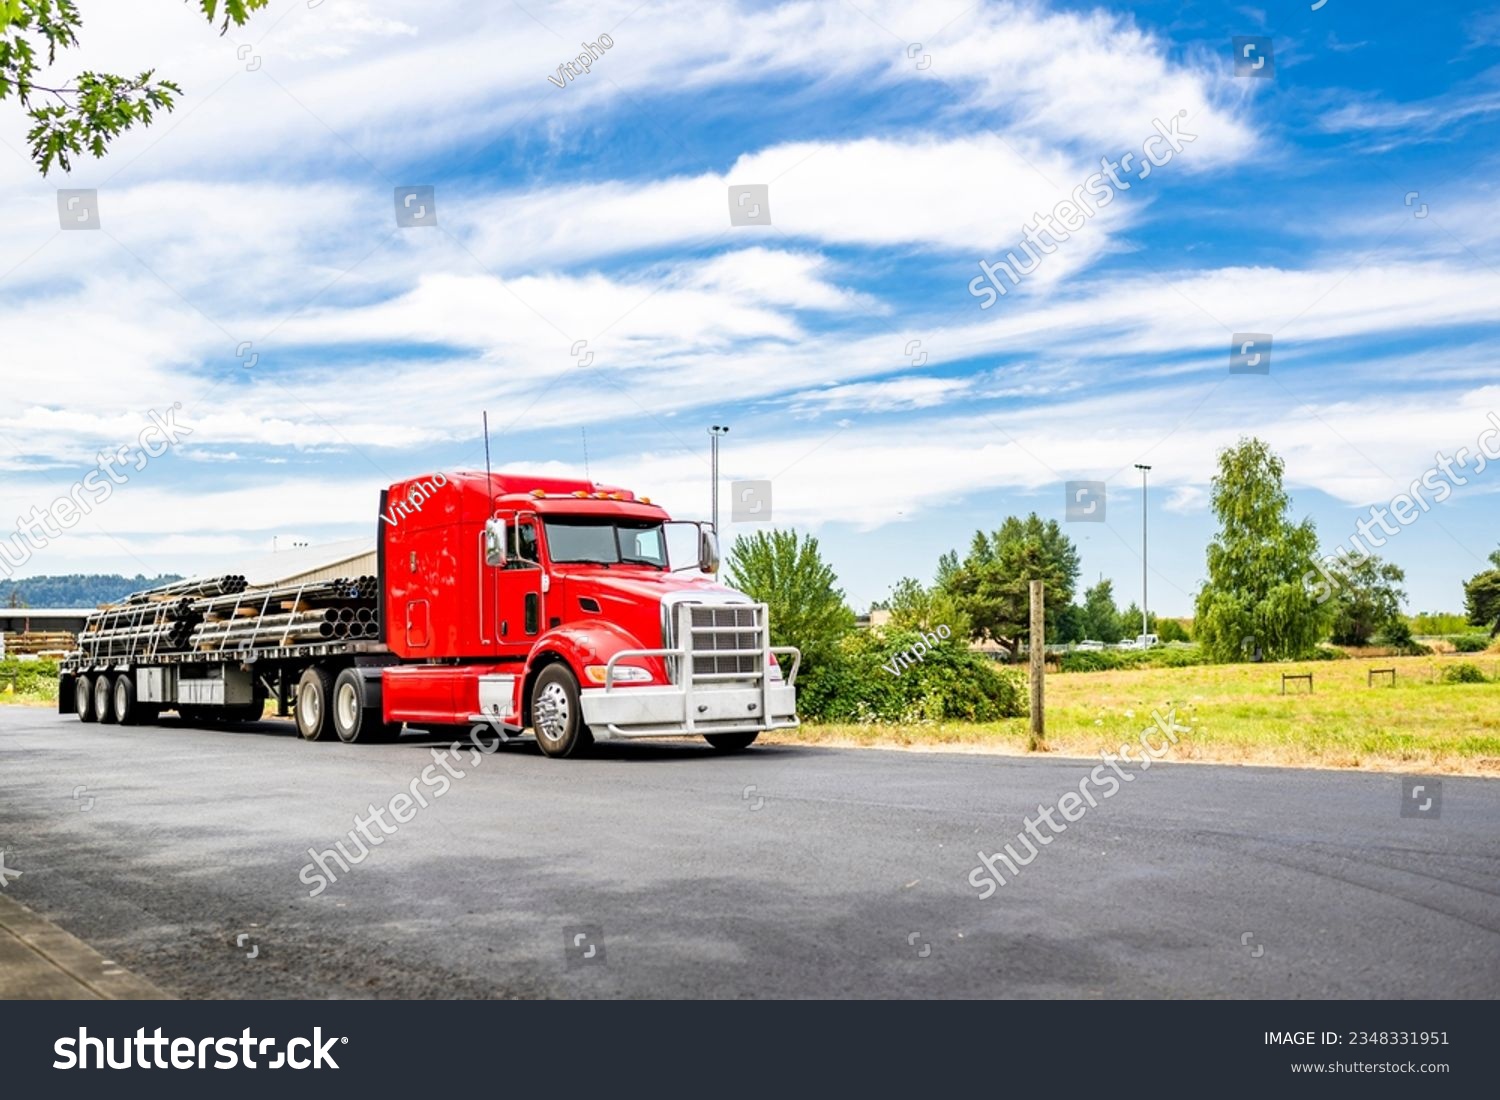 Long hauler big rig red semi truck tractor with grille guard and loaded by pipes flat bed semi trailer standing on the local road take a break for truck driver rest according to log book schedule #2348331951